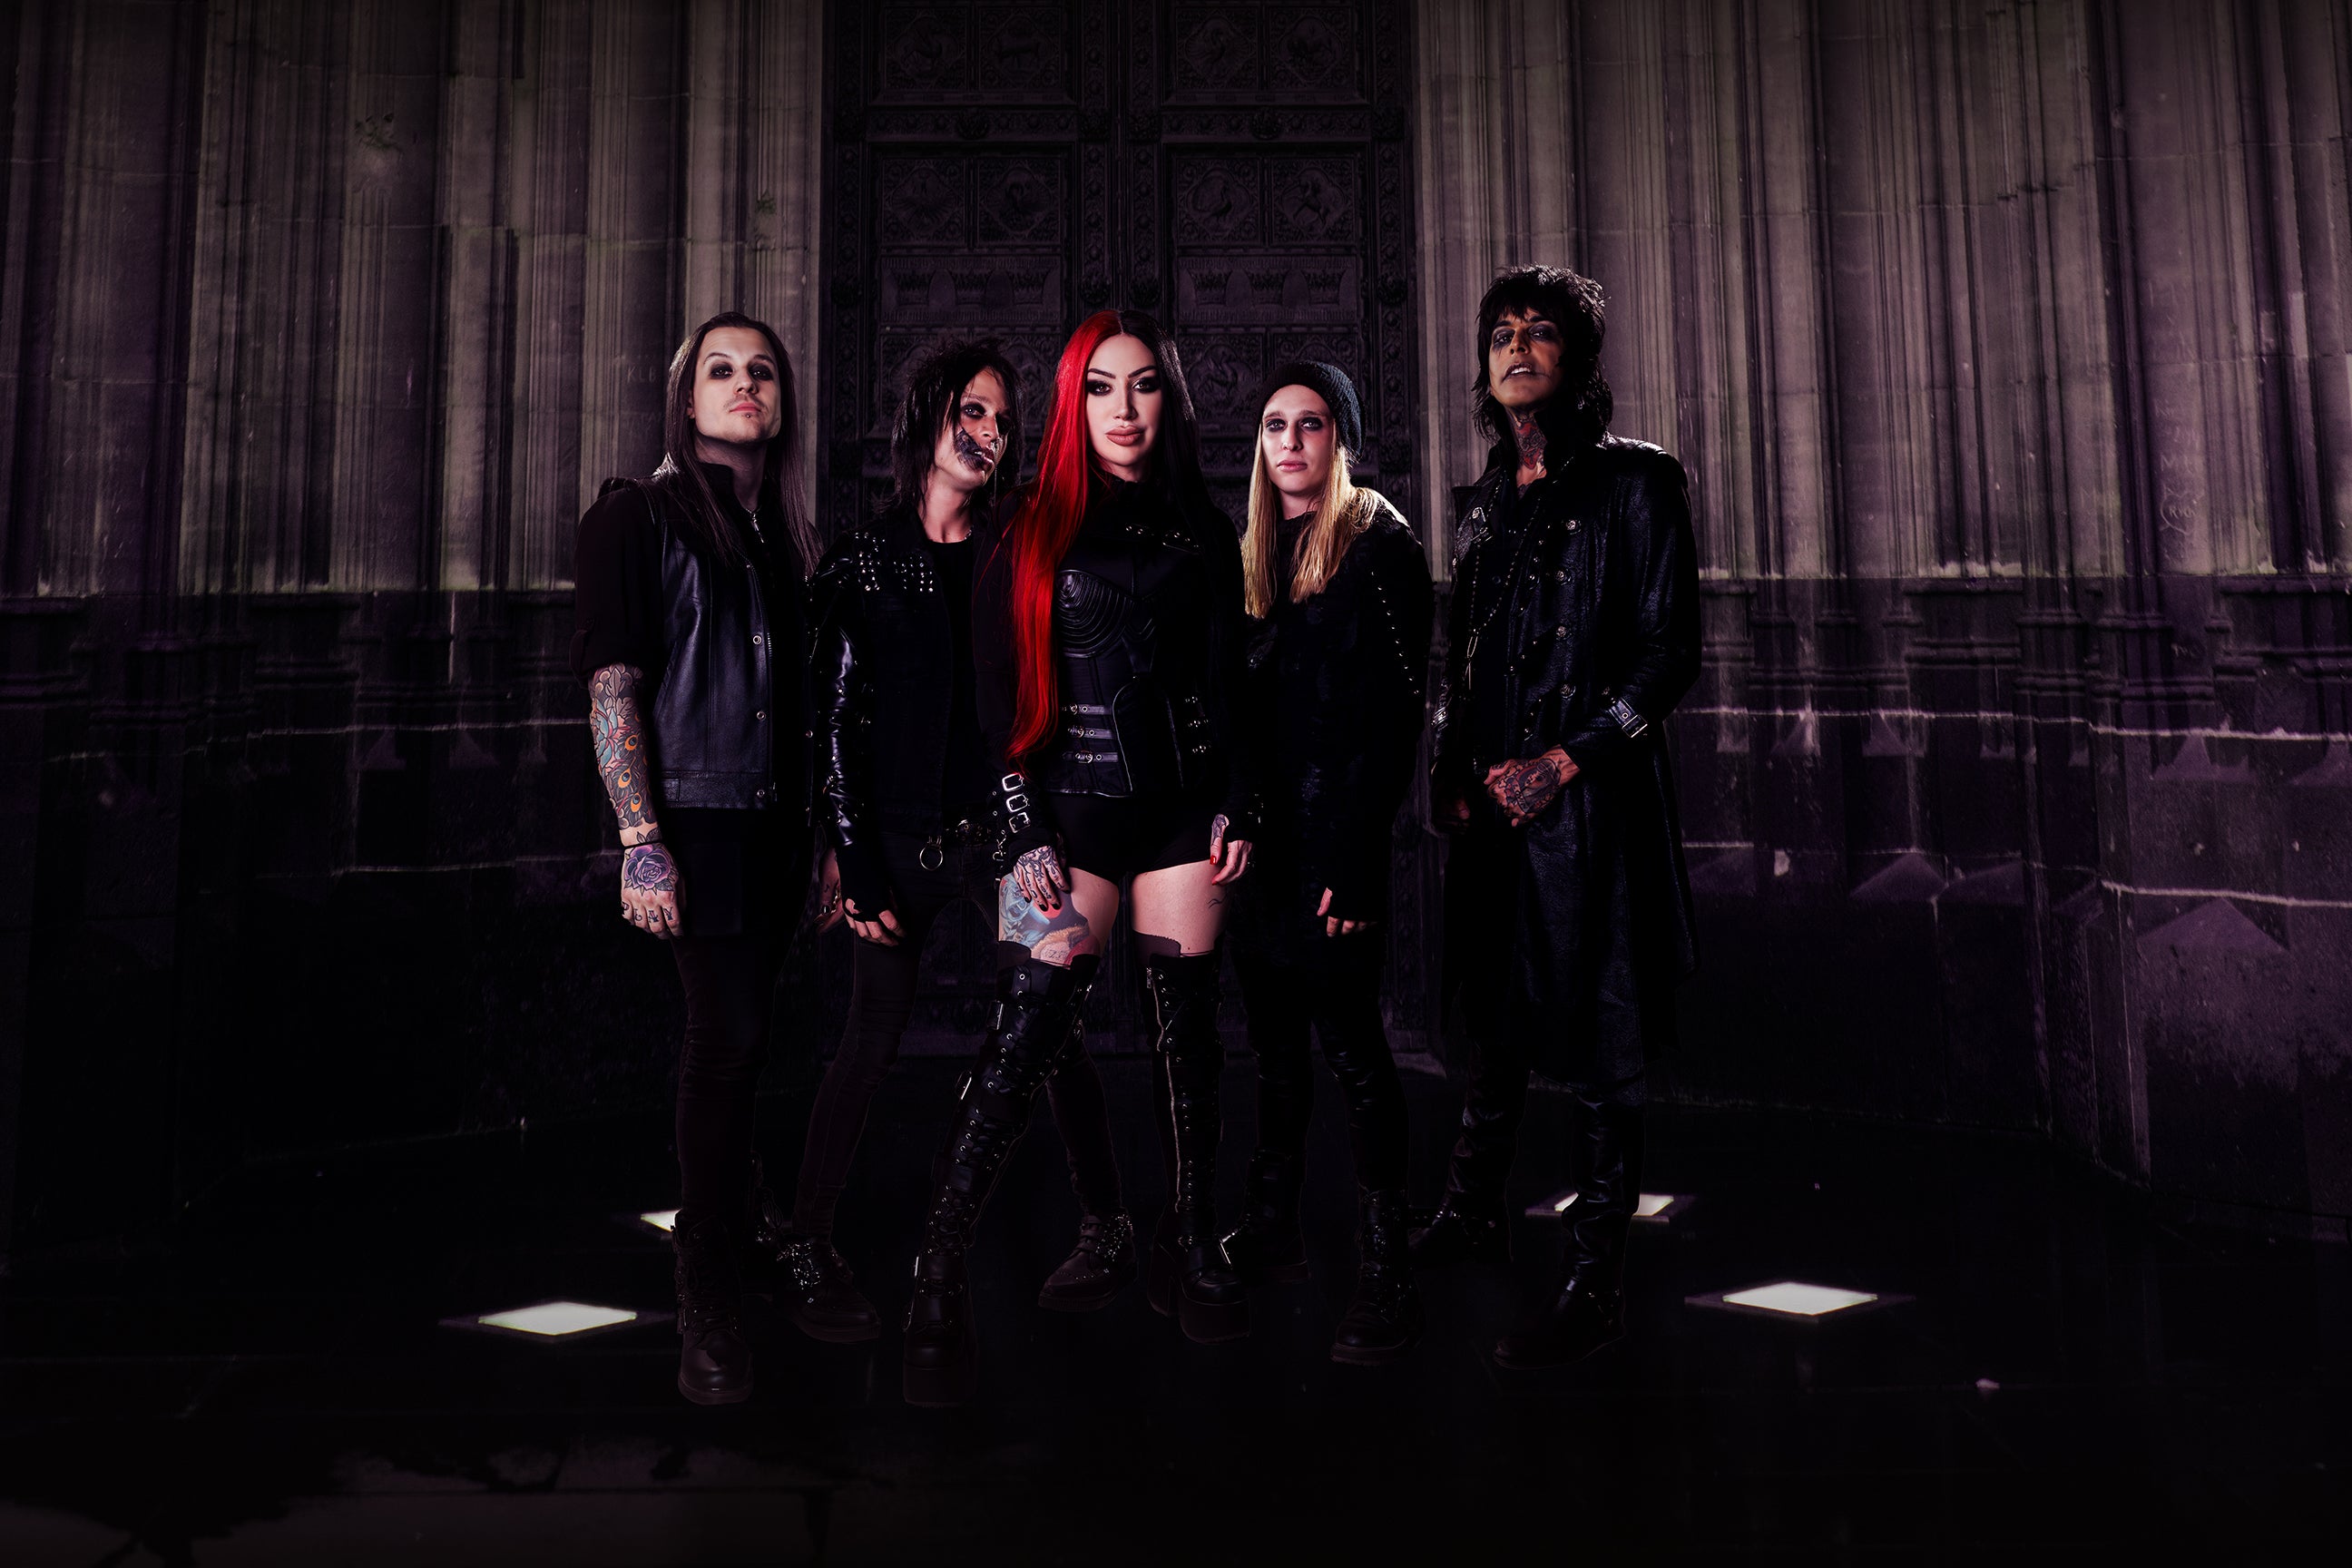 exclusive presale code for New Years Day presale tickets in London at O2 Academy Islington